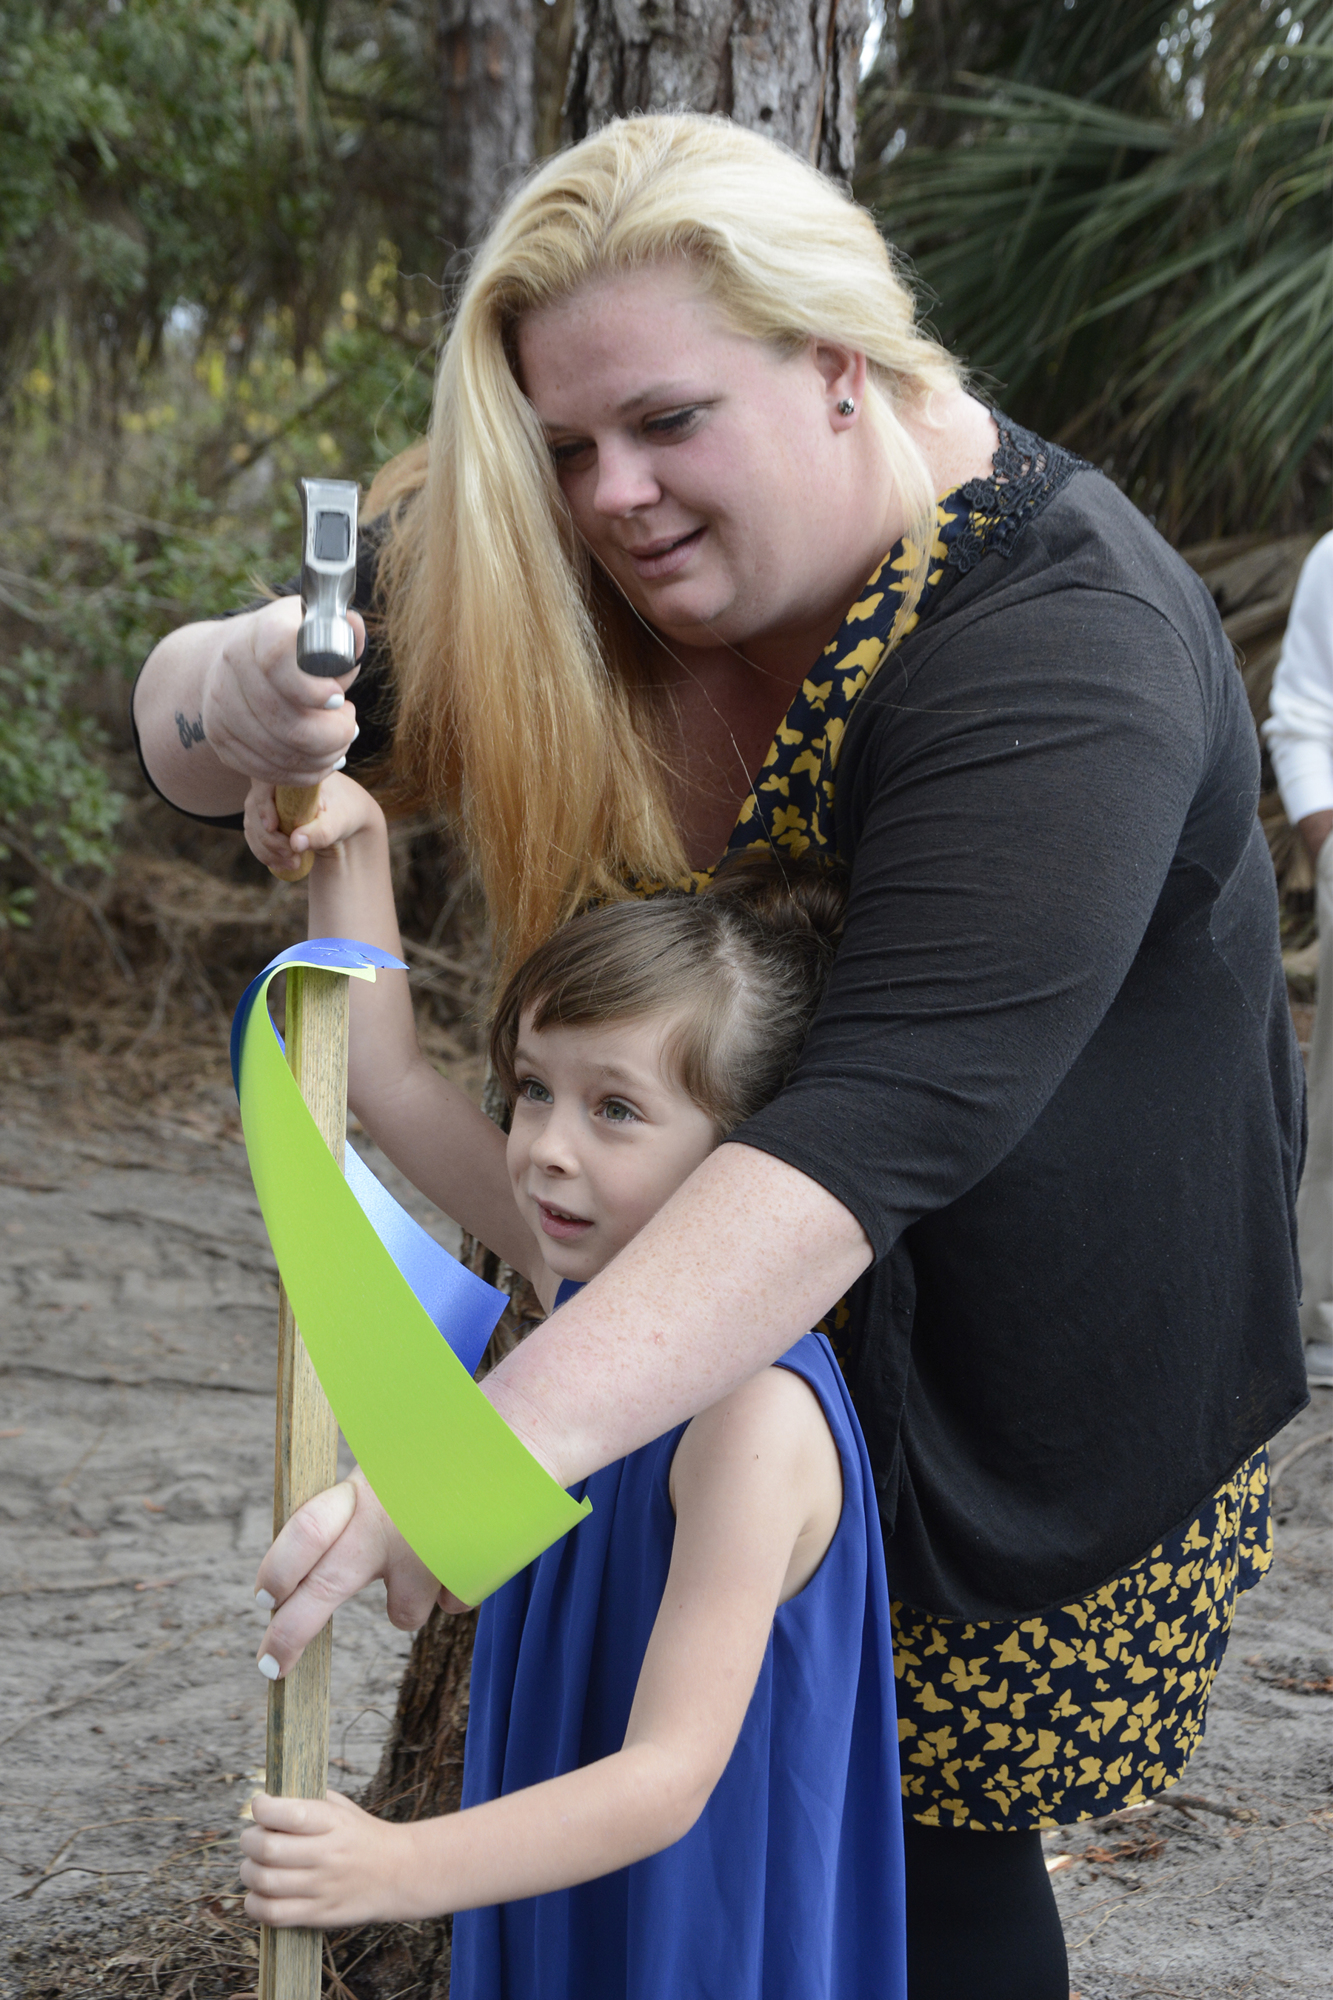 The fourth stake was set in place to honor the home recipients Christina Whitaker and her daughter Kaydence Bliss.